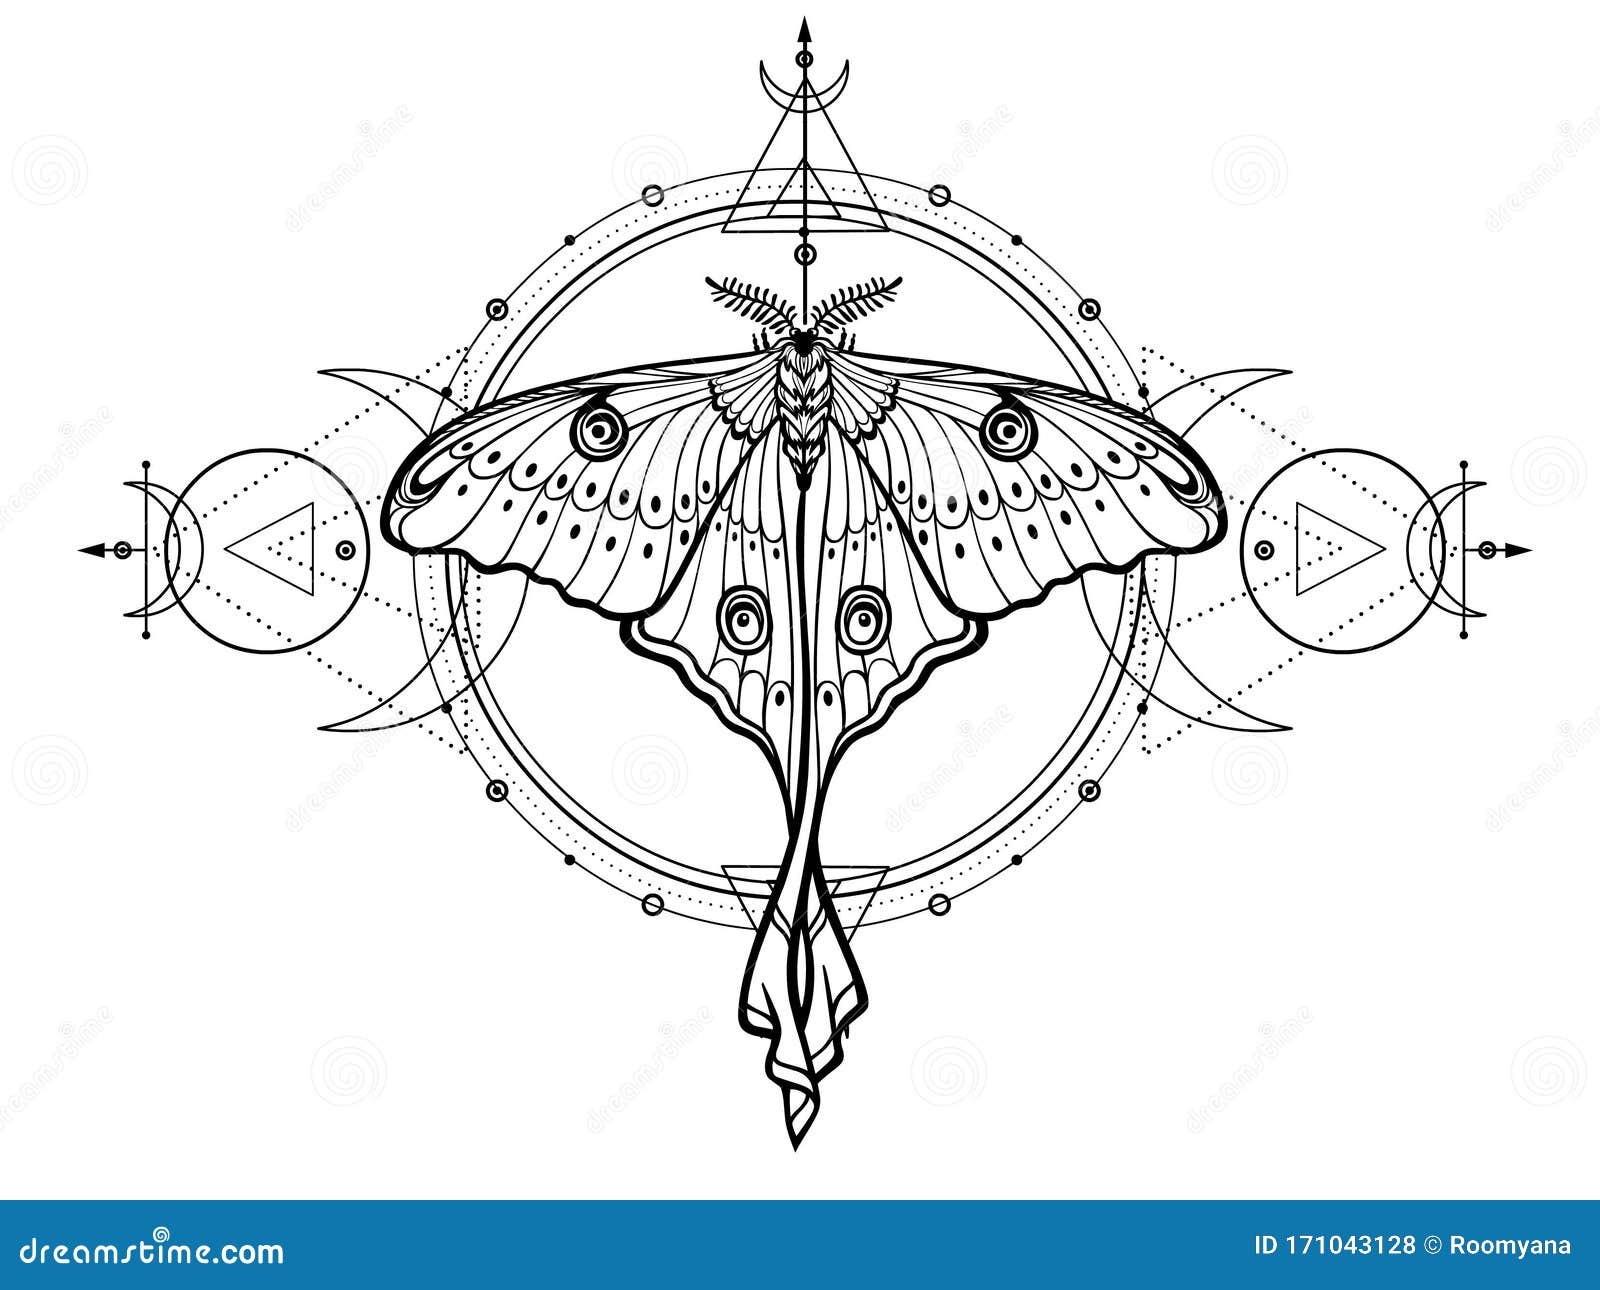 mystical drawing: tropical butterfly, sacred geometry, moon phases, energy circles.